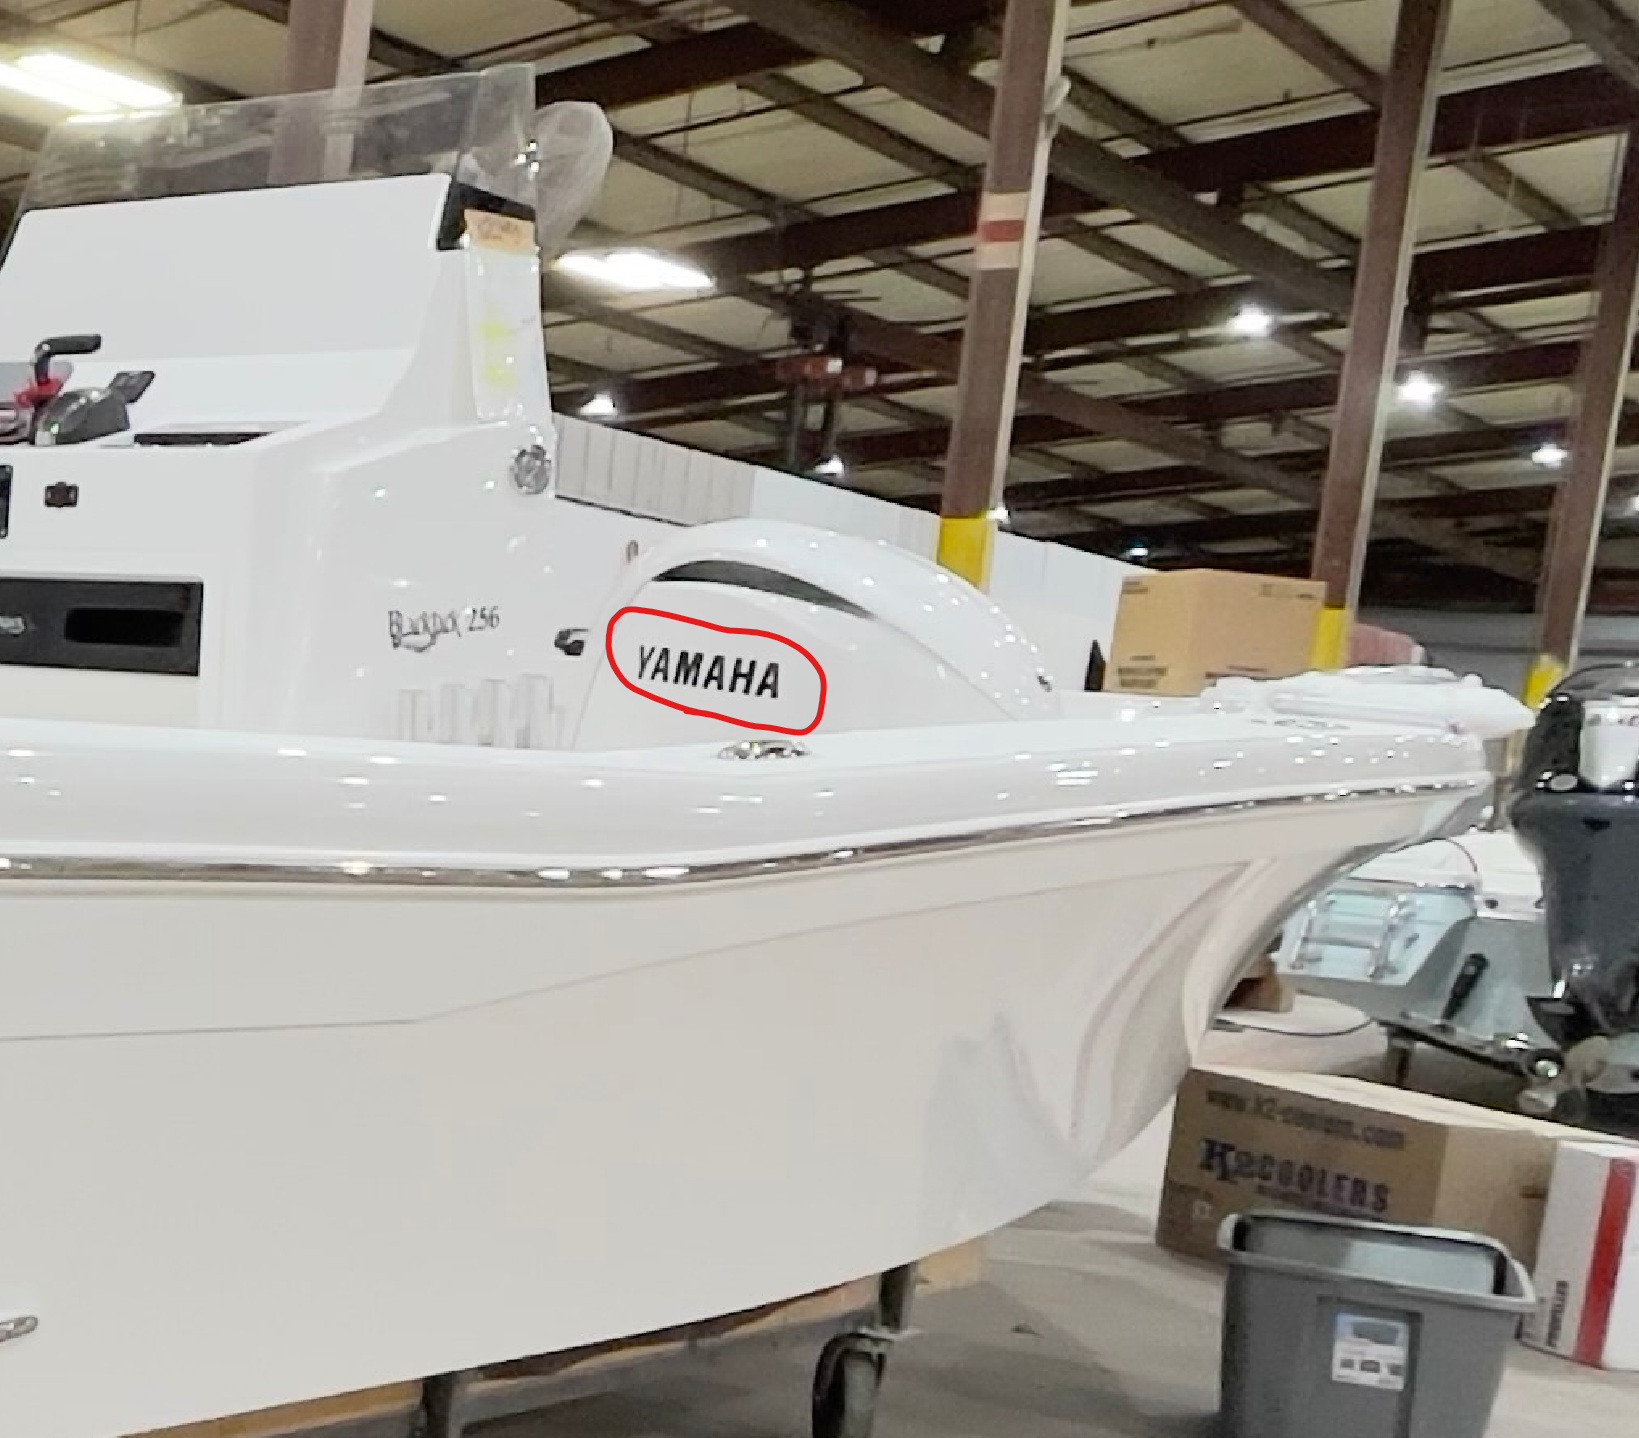 Warning stickers on new boat - The Hull Truth - Boating and